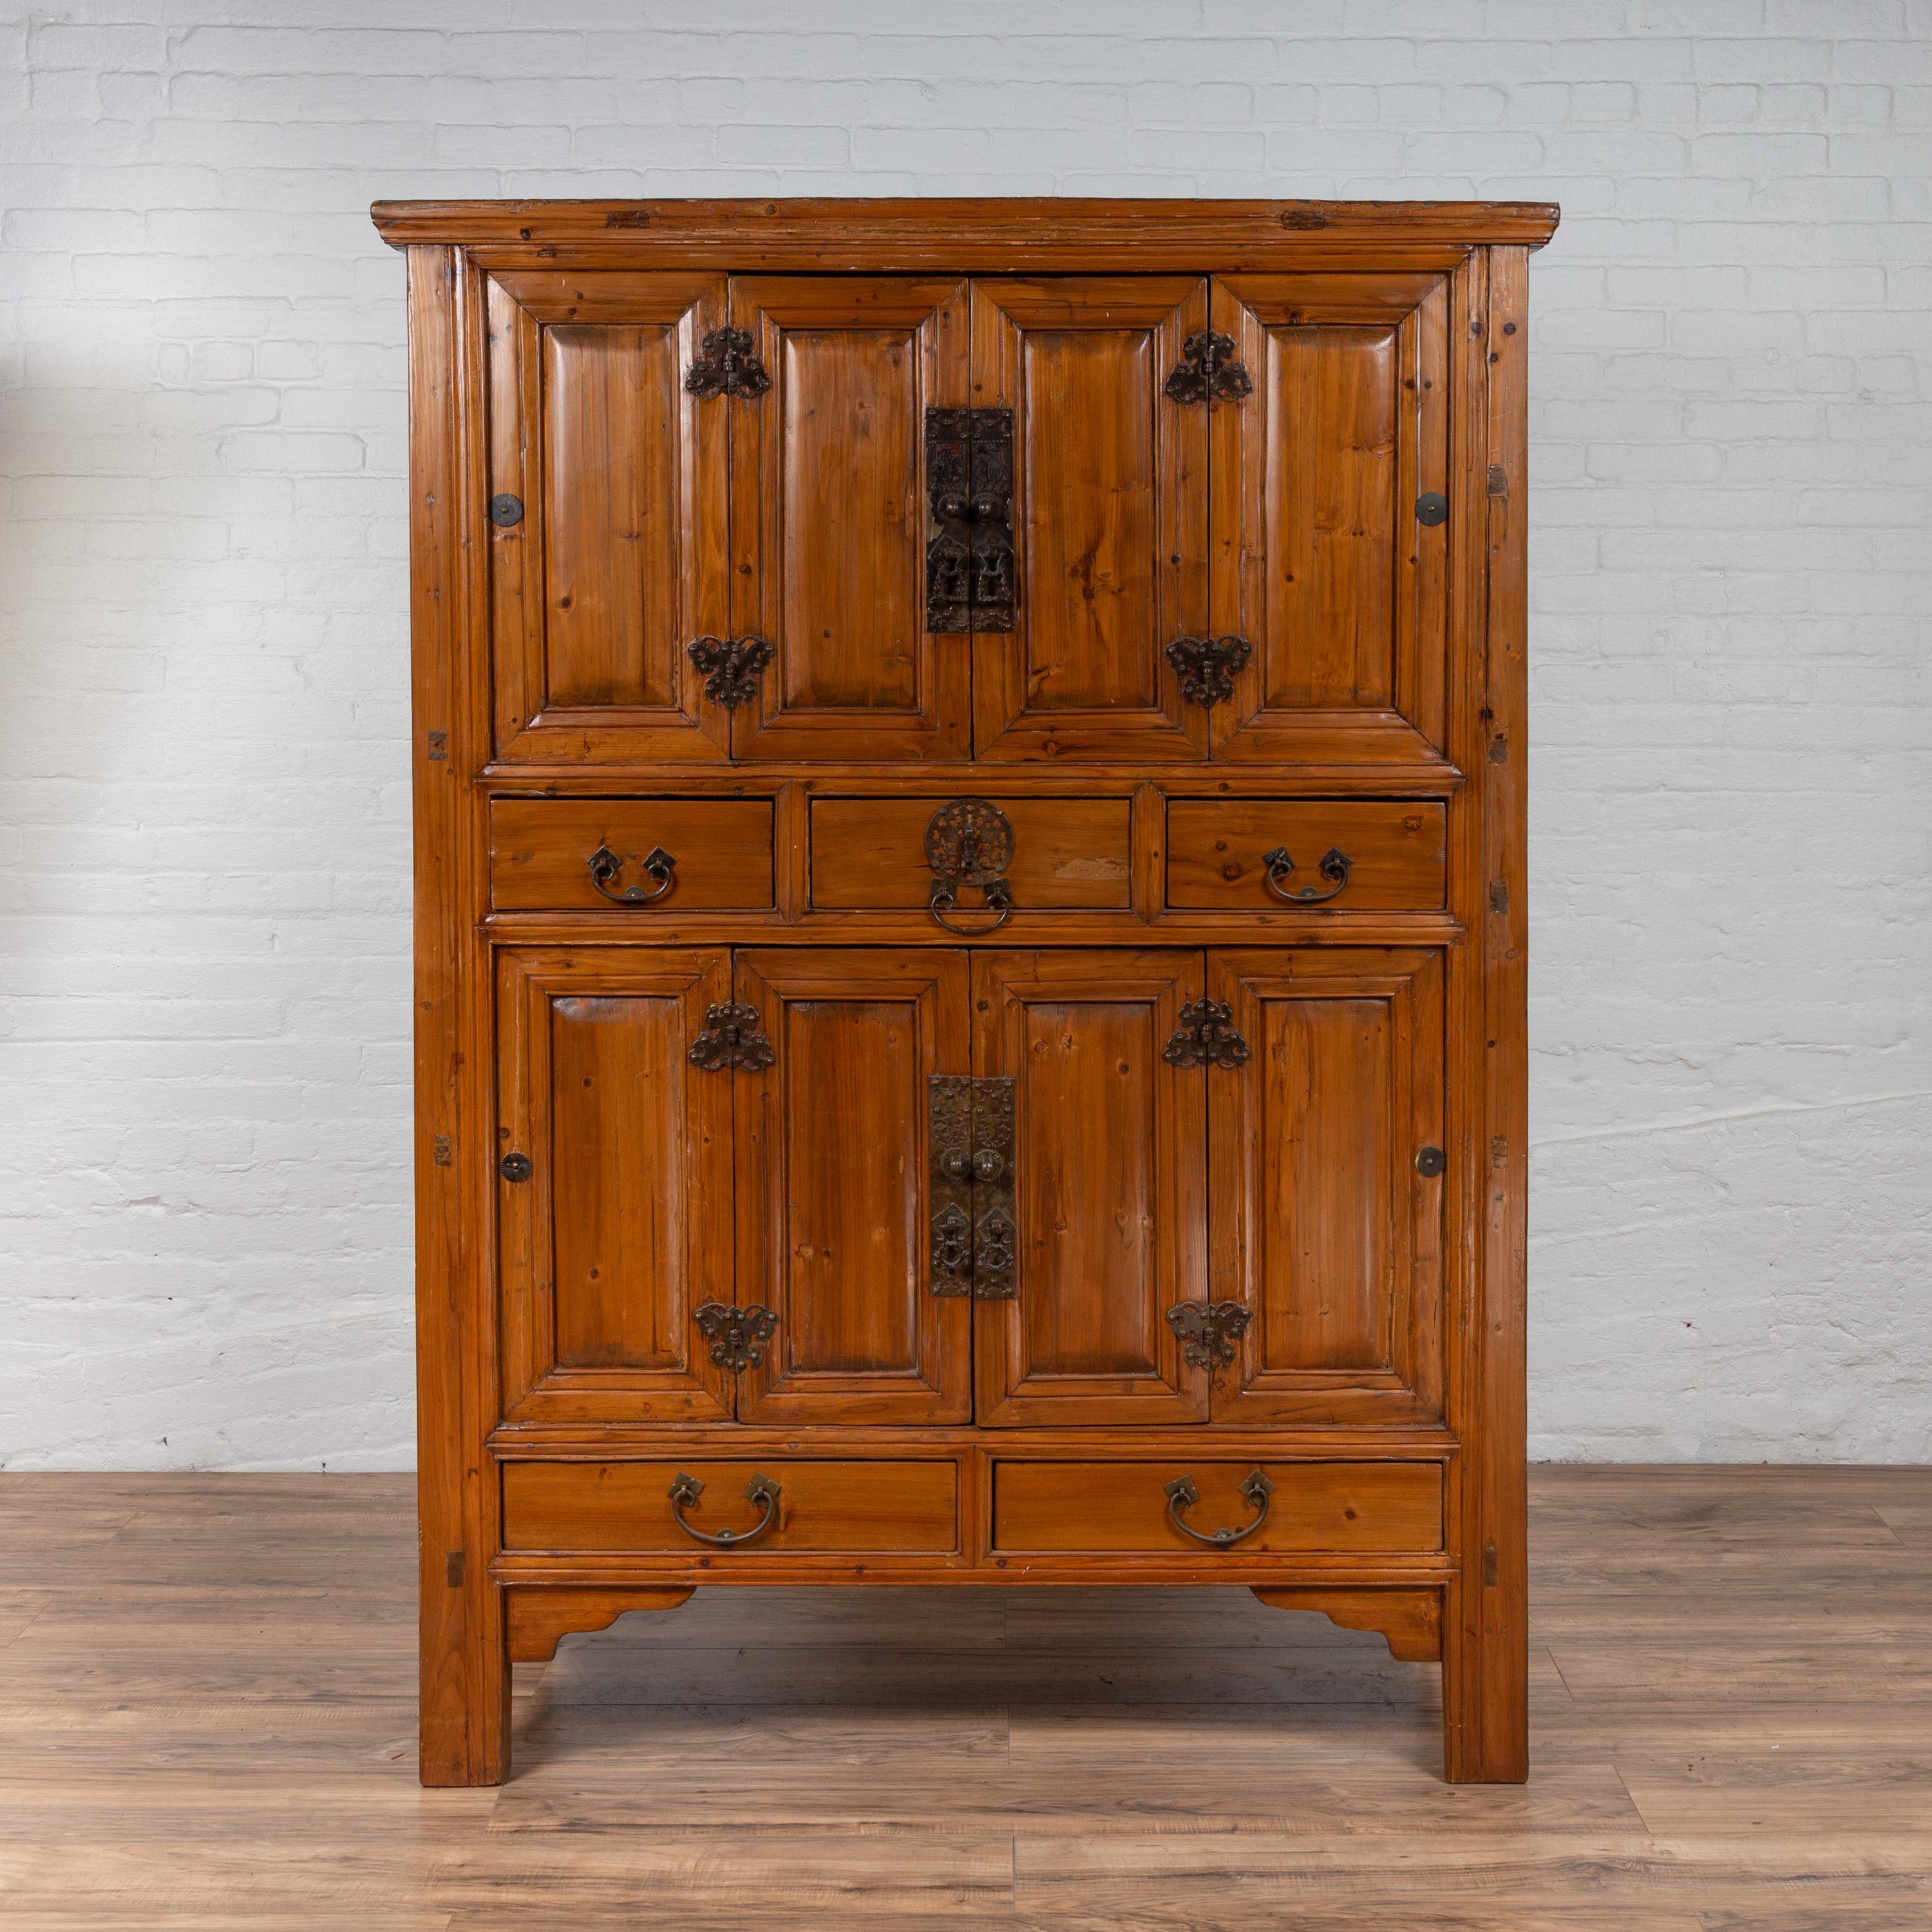 A Chinese Qing dynasty style wooden cabinet from the late 19th century, with paneled doors, drawers and butterfly iron hardware. Born in China during the late 19th century, this exquisite wooden cabinet features a molded cornice, sitting above an